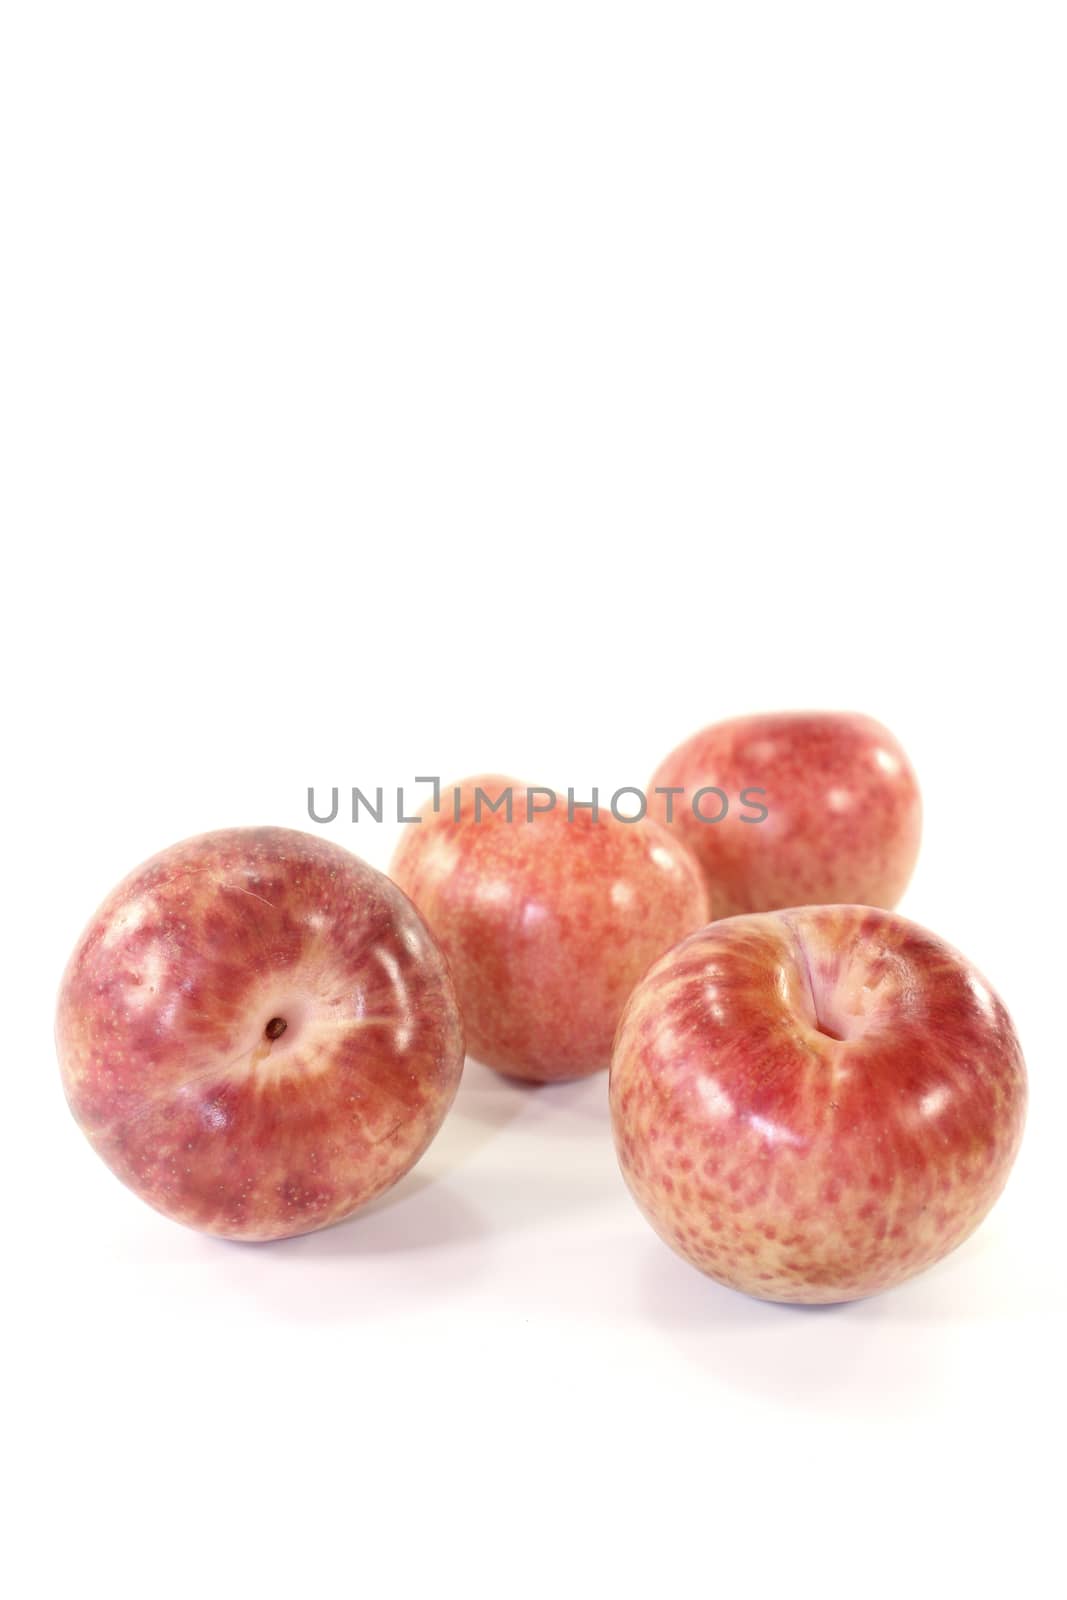 delicious orange-red pluots on a light background